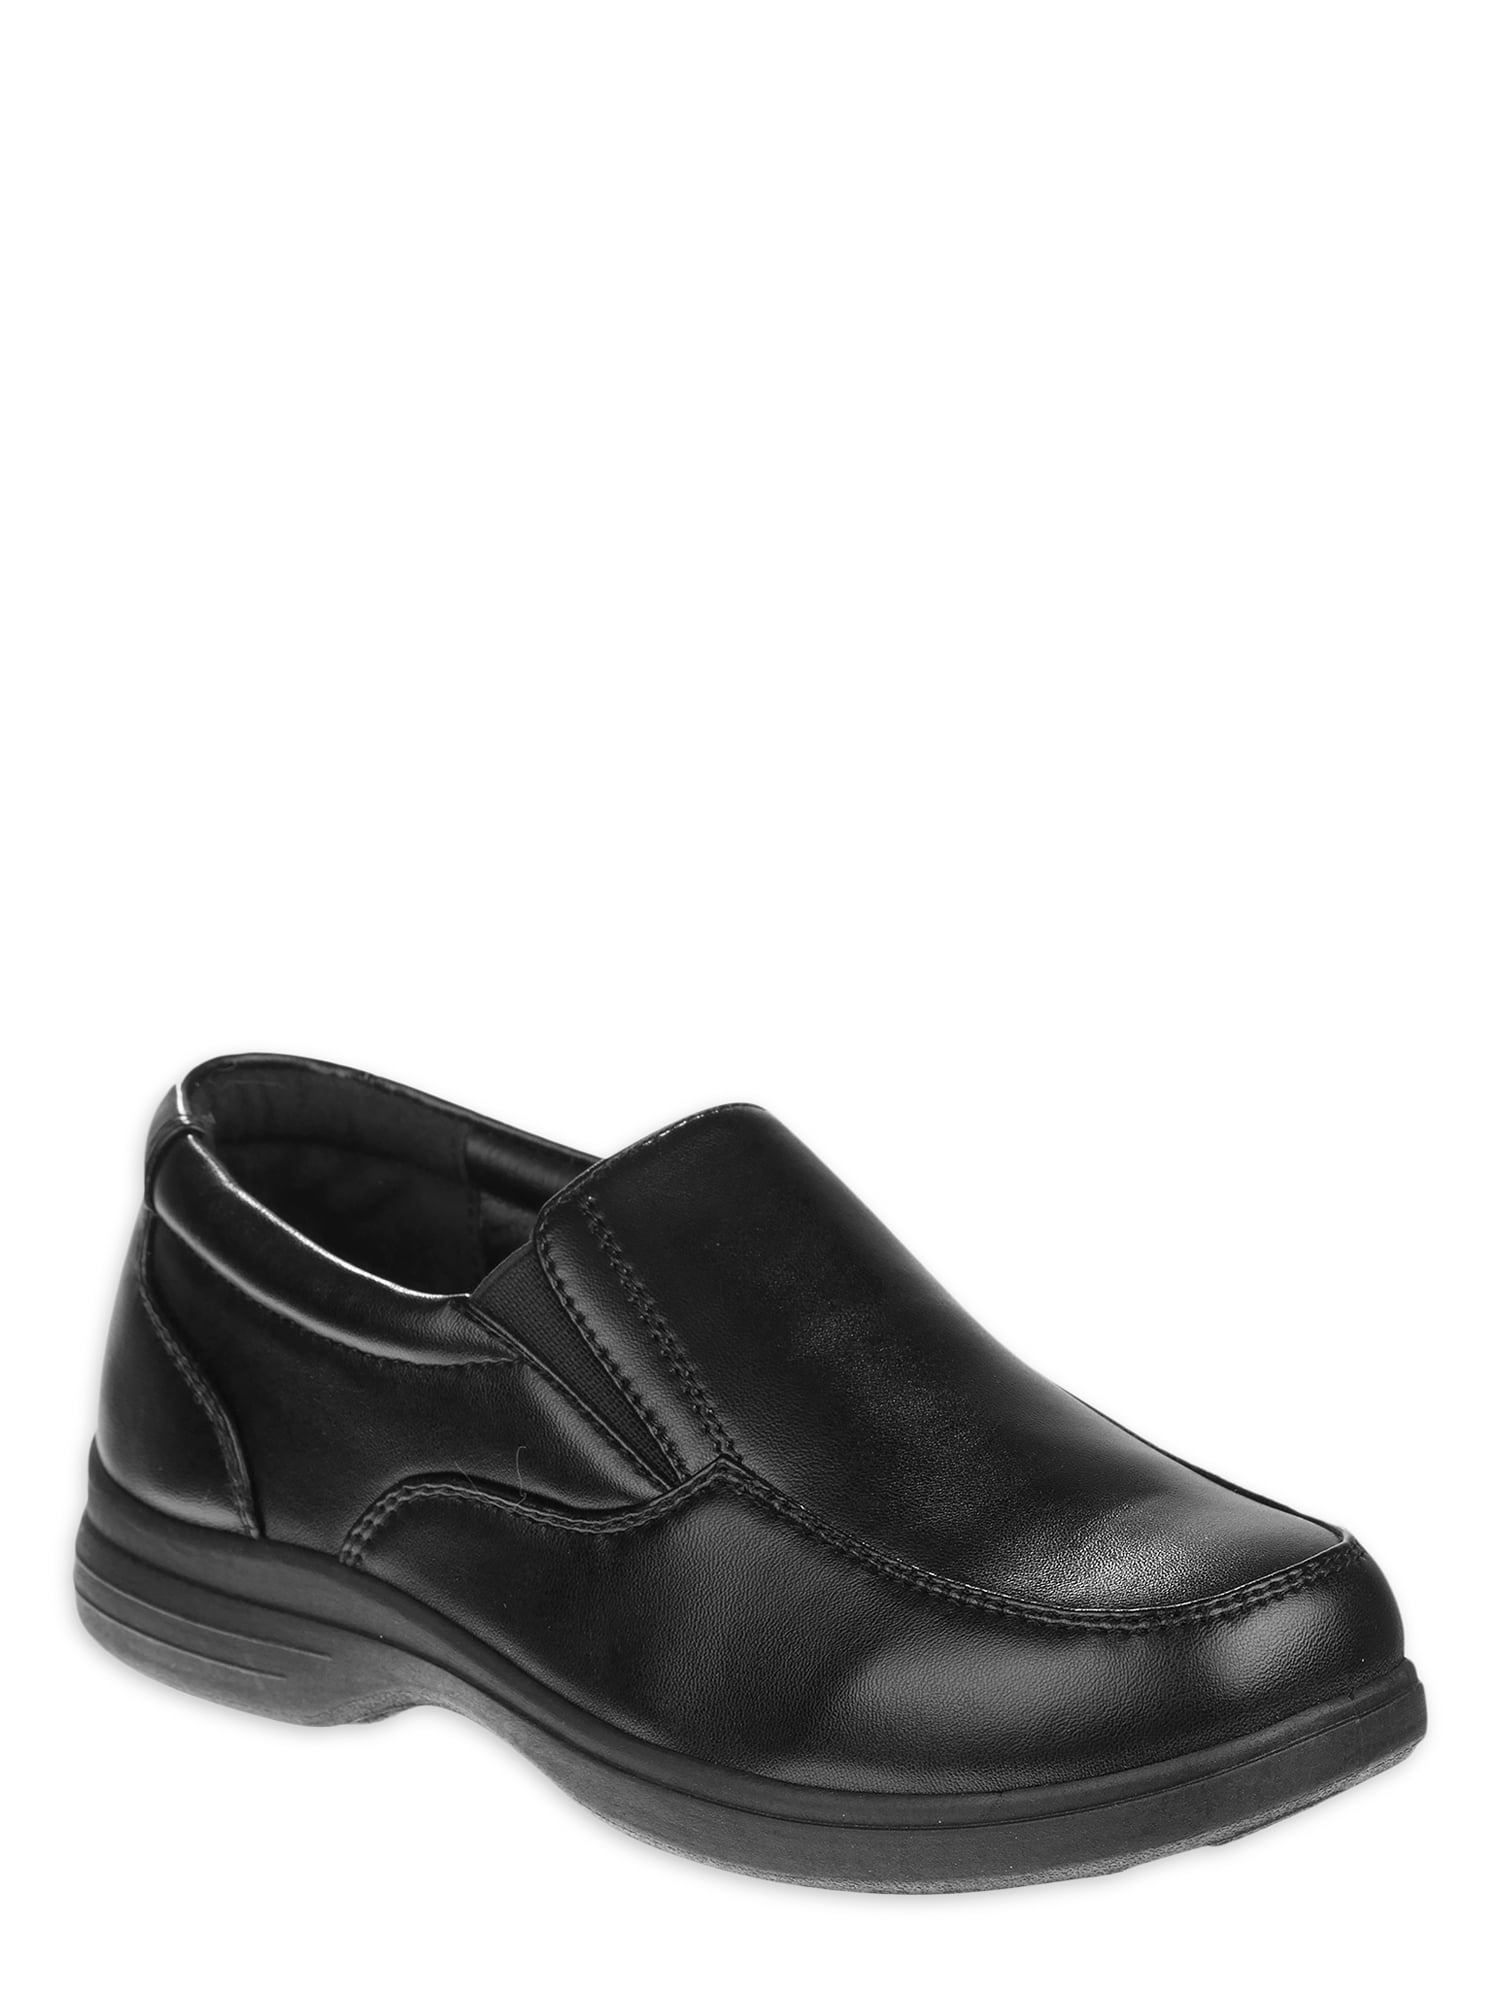 Buy > dress shoes for school > in stock